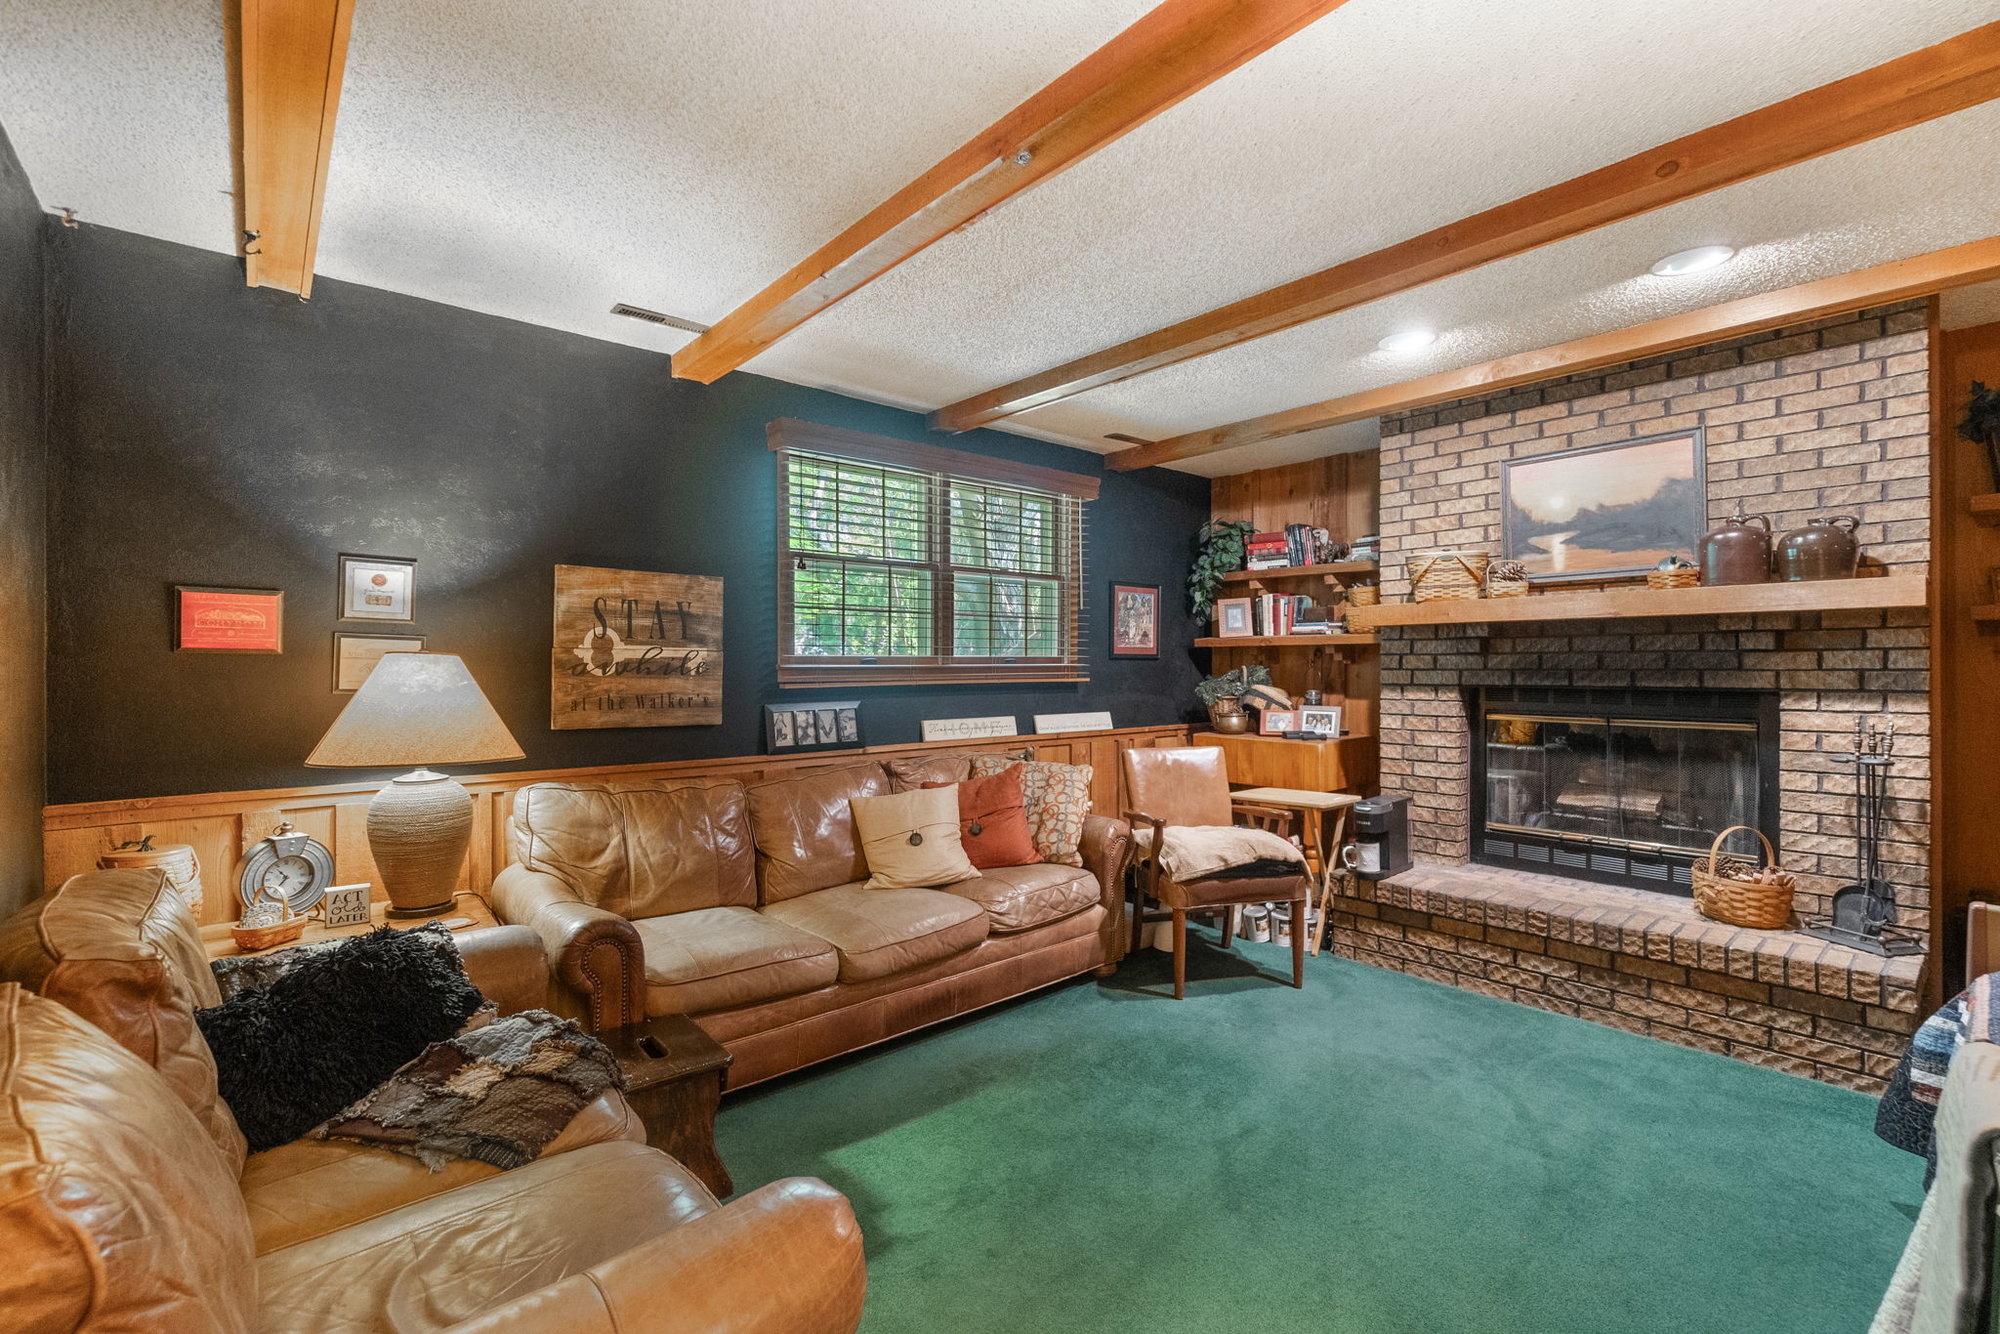 The Perfectly Maintained English Cottage Split Level Home in Waterloo - 1914 Harrow Rd., Waterloo